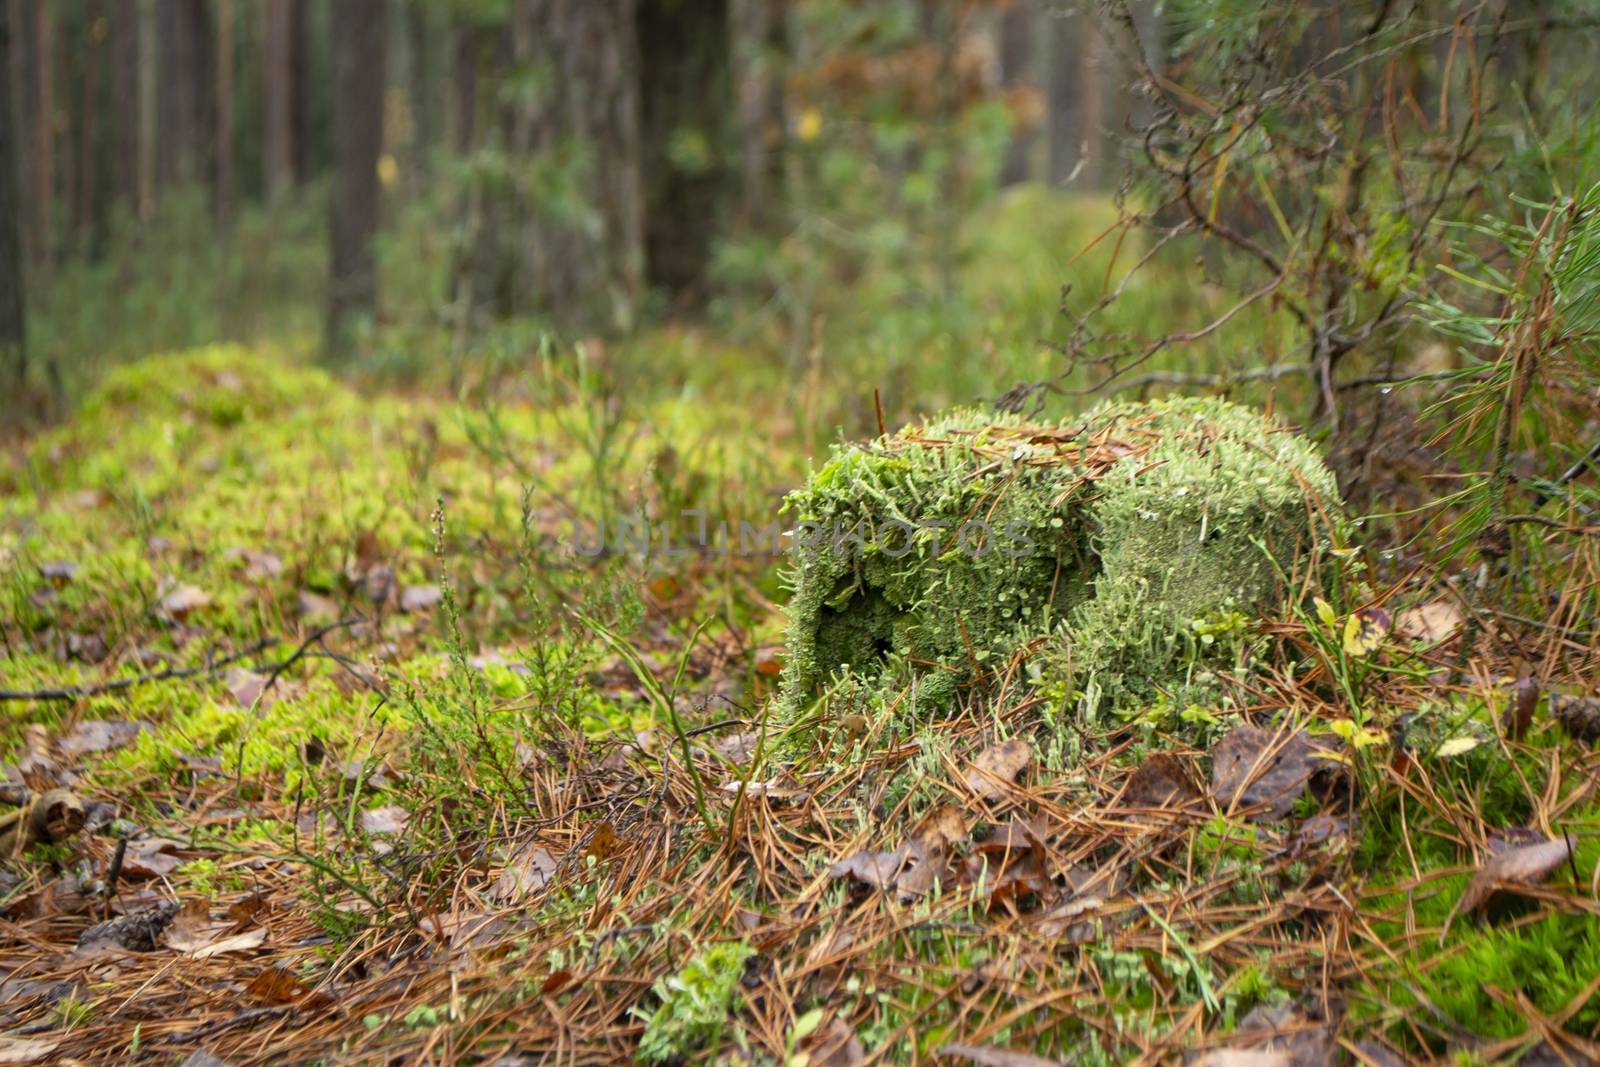 Old stump overgrown with moss in the autumn wild forest